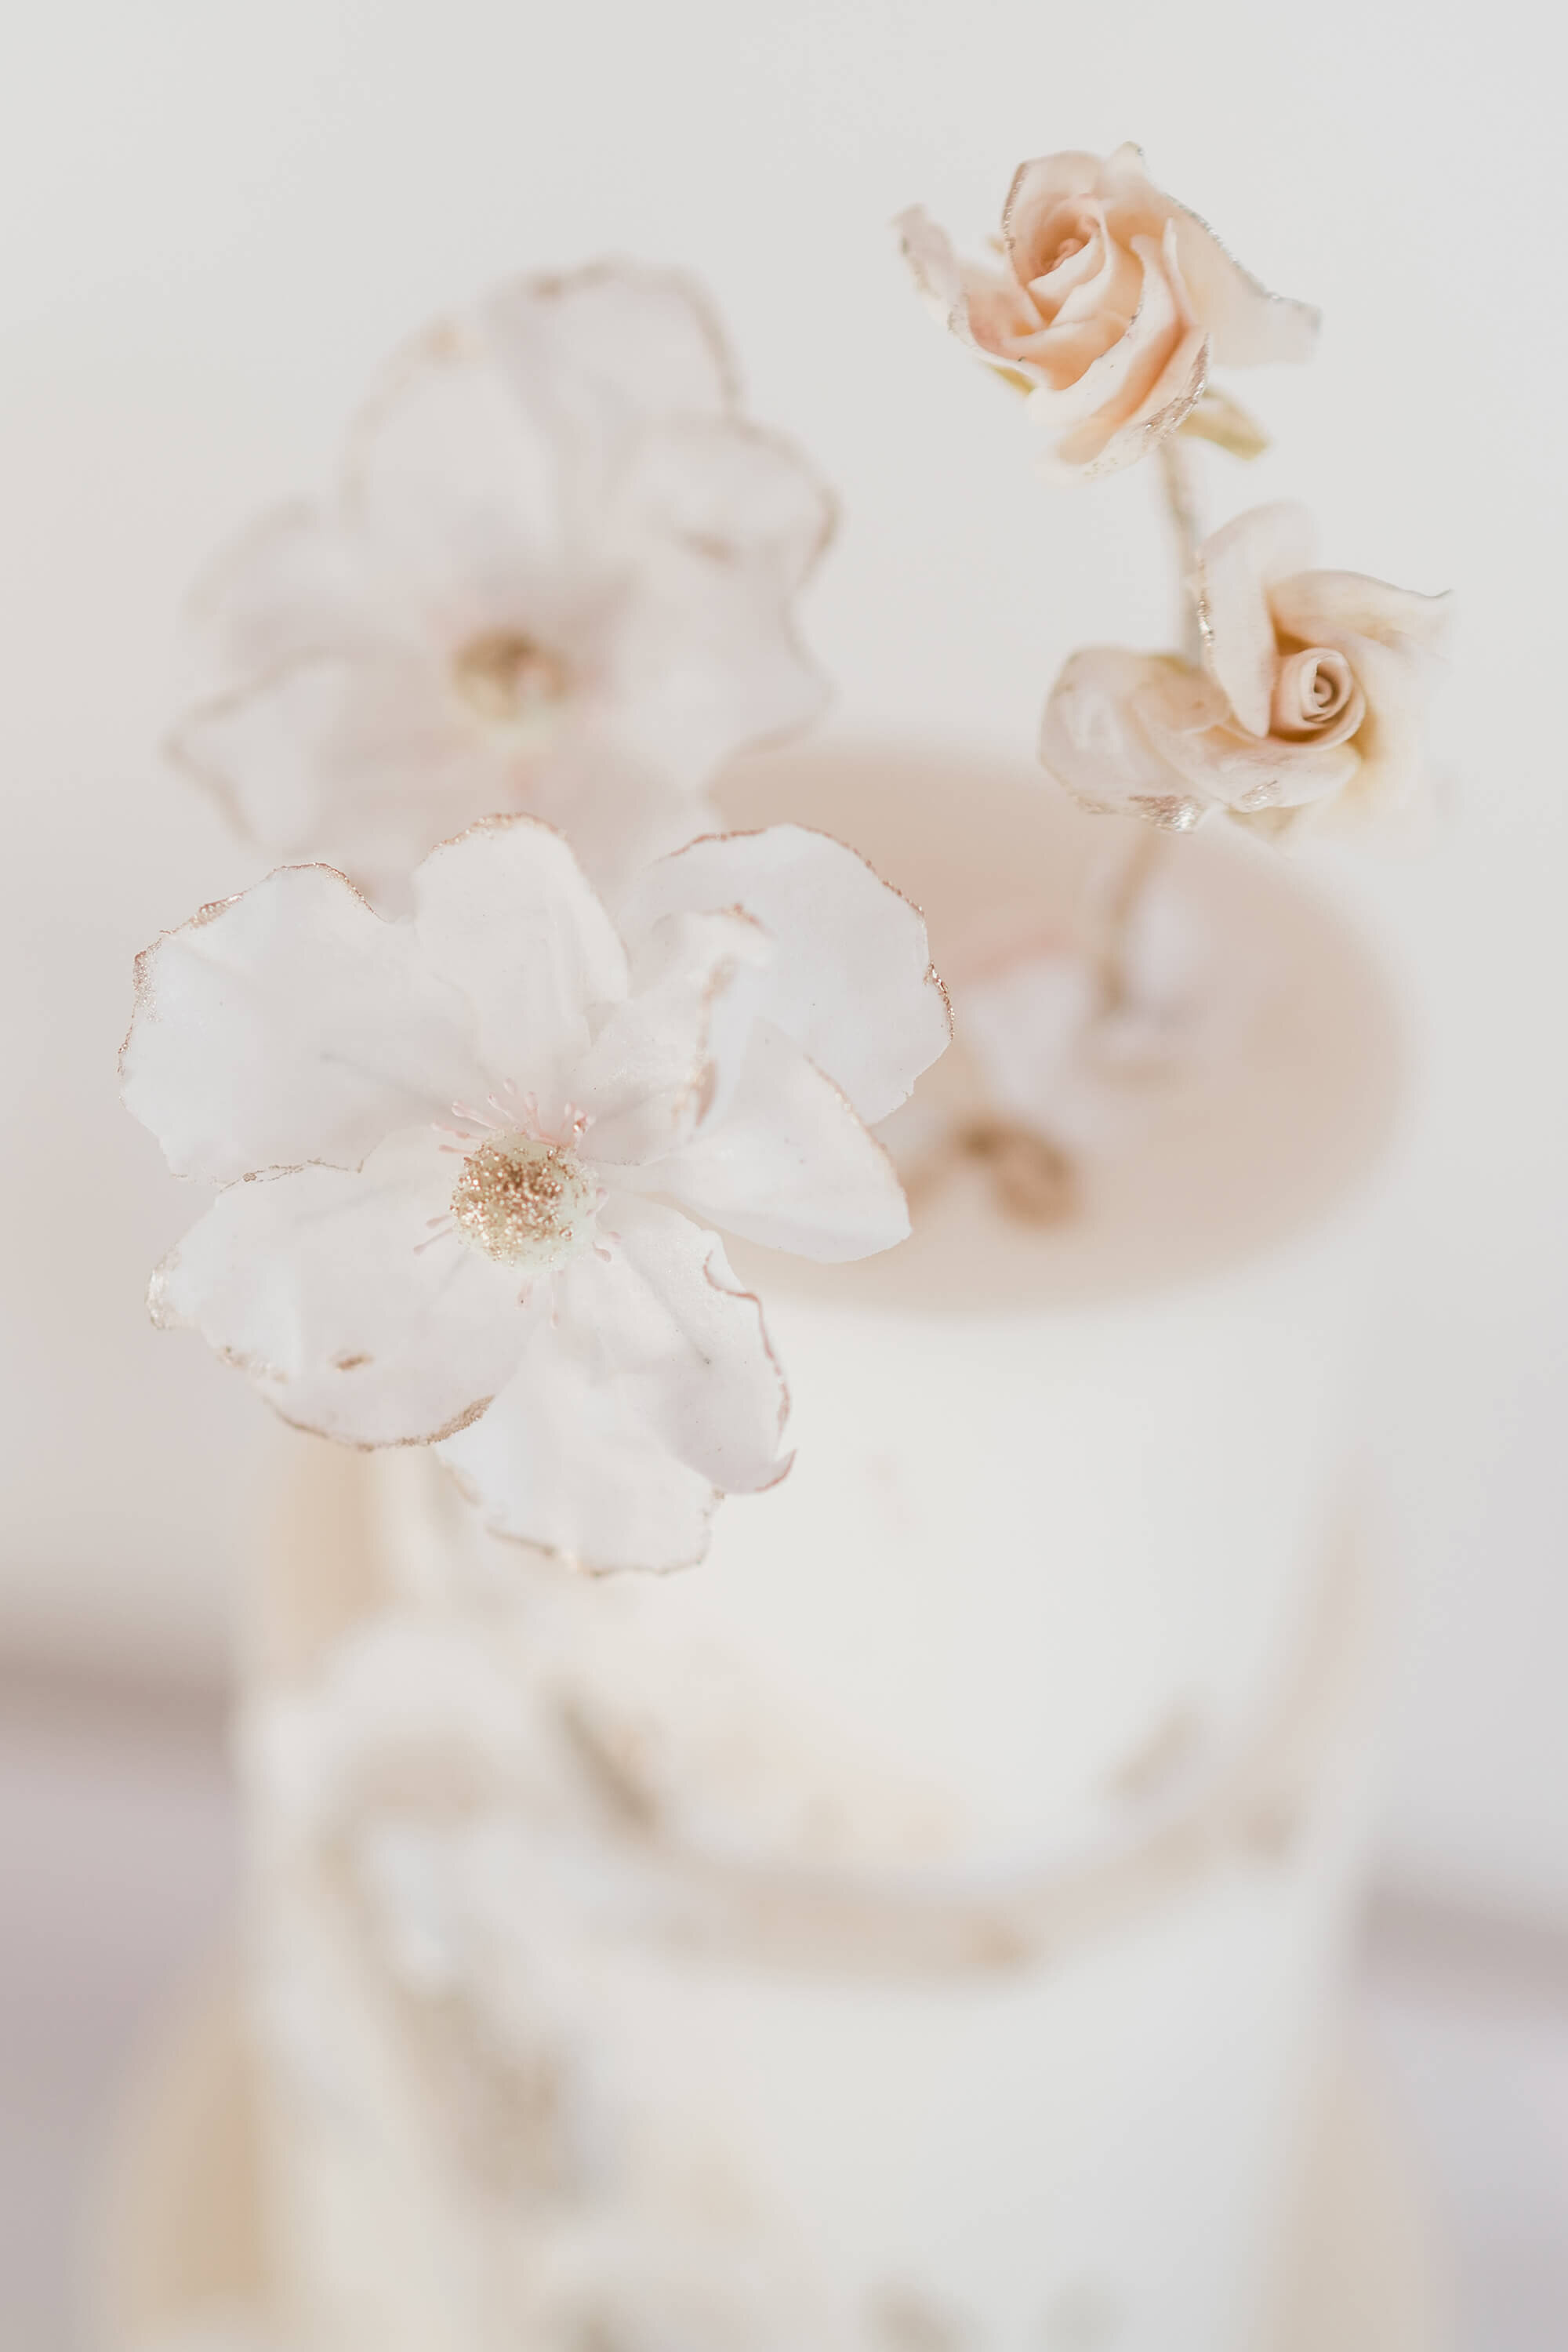 Modern Wedding Cakes | Cakes by Robin